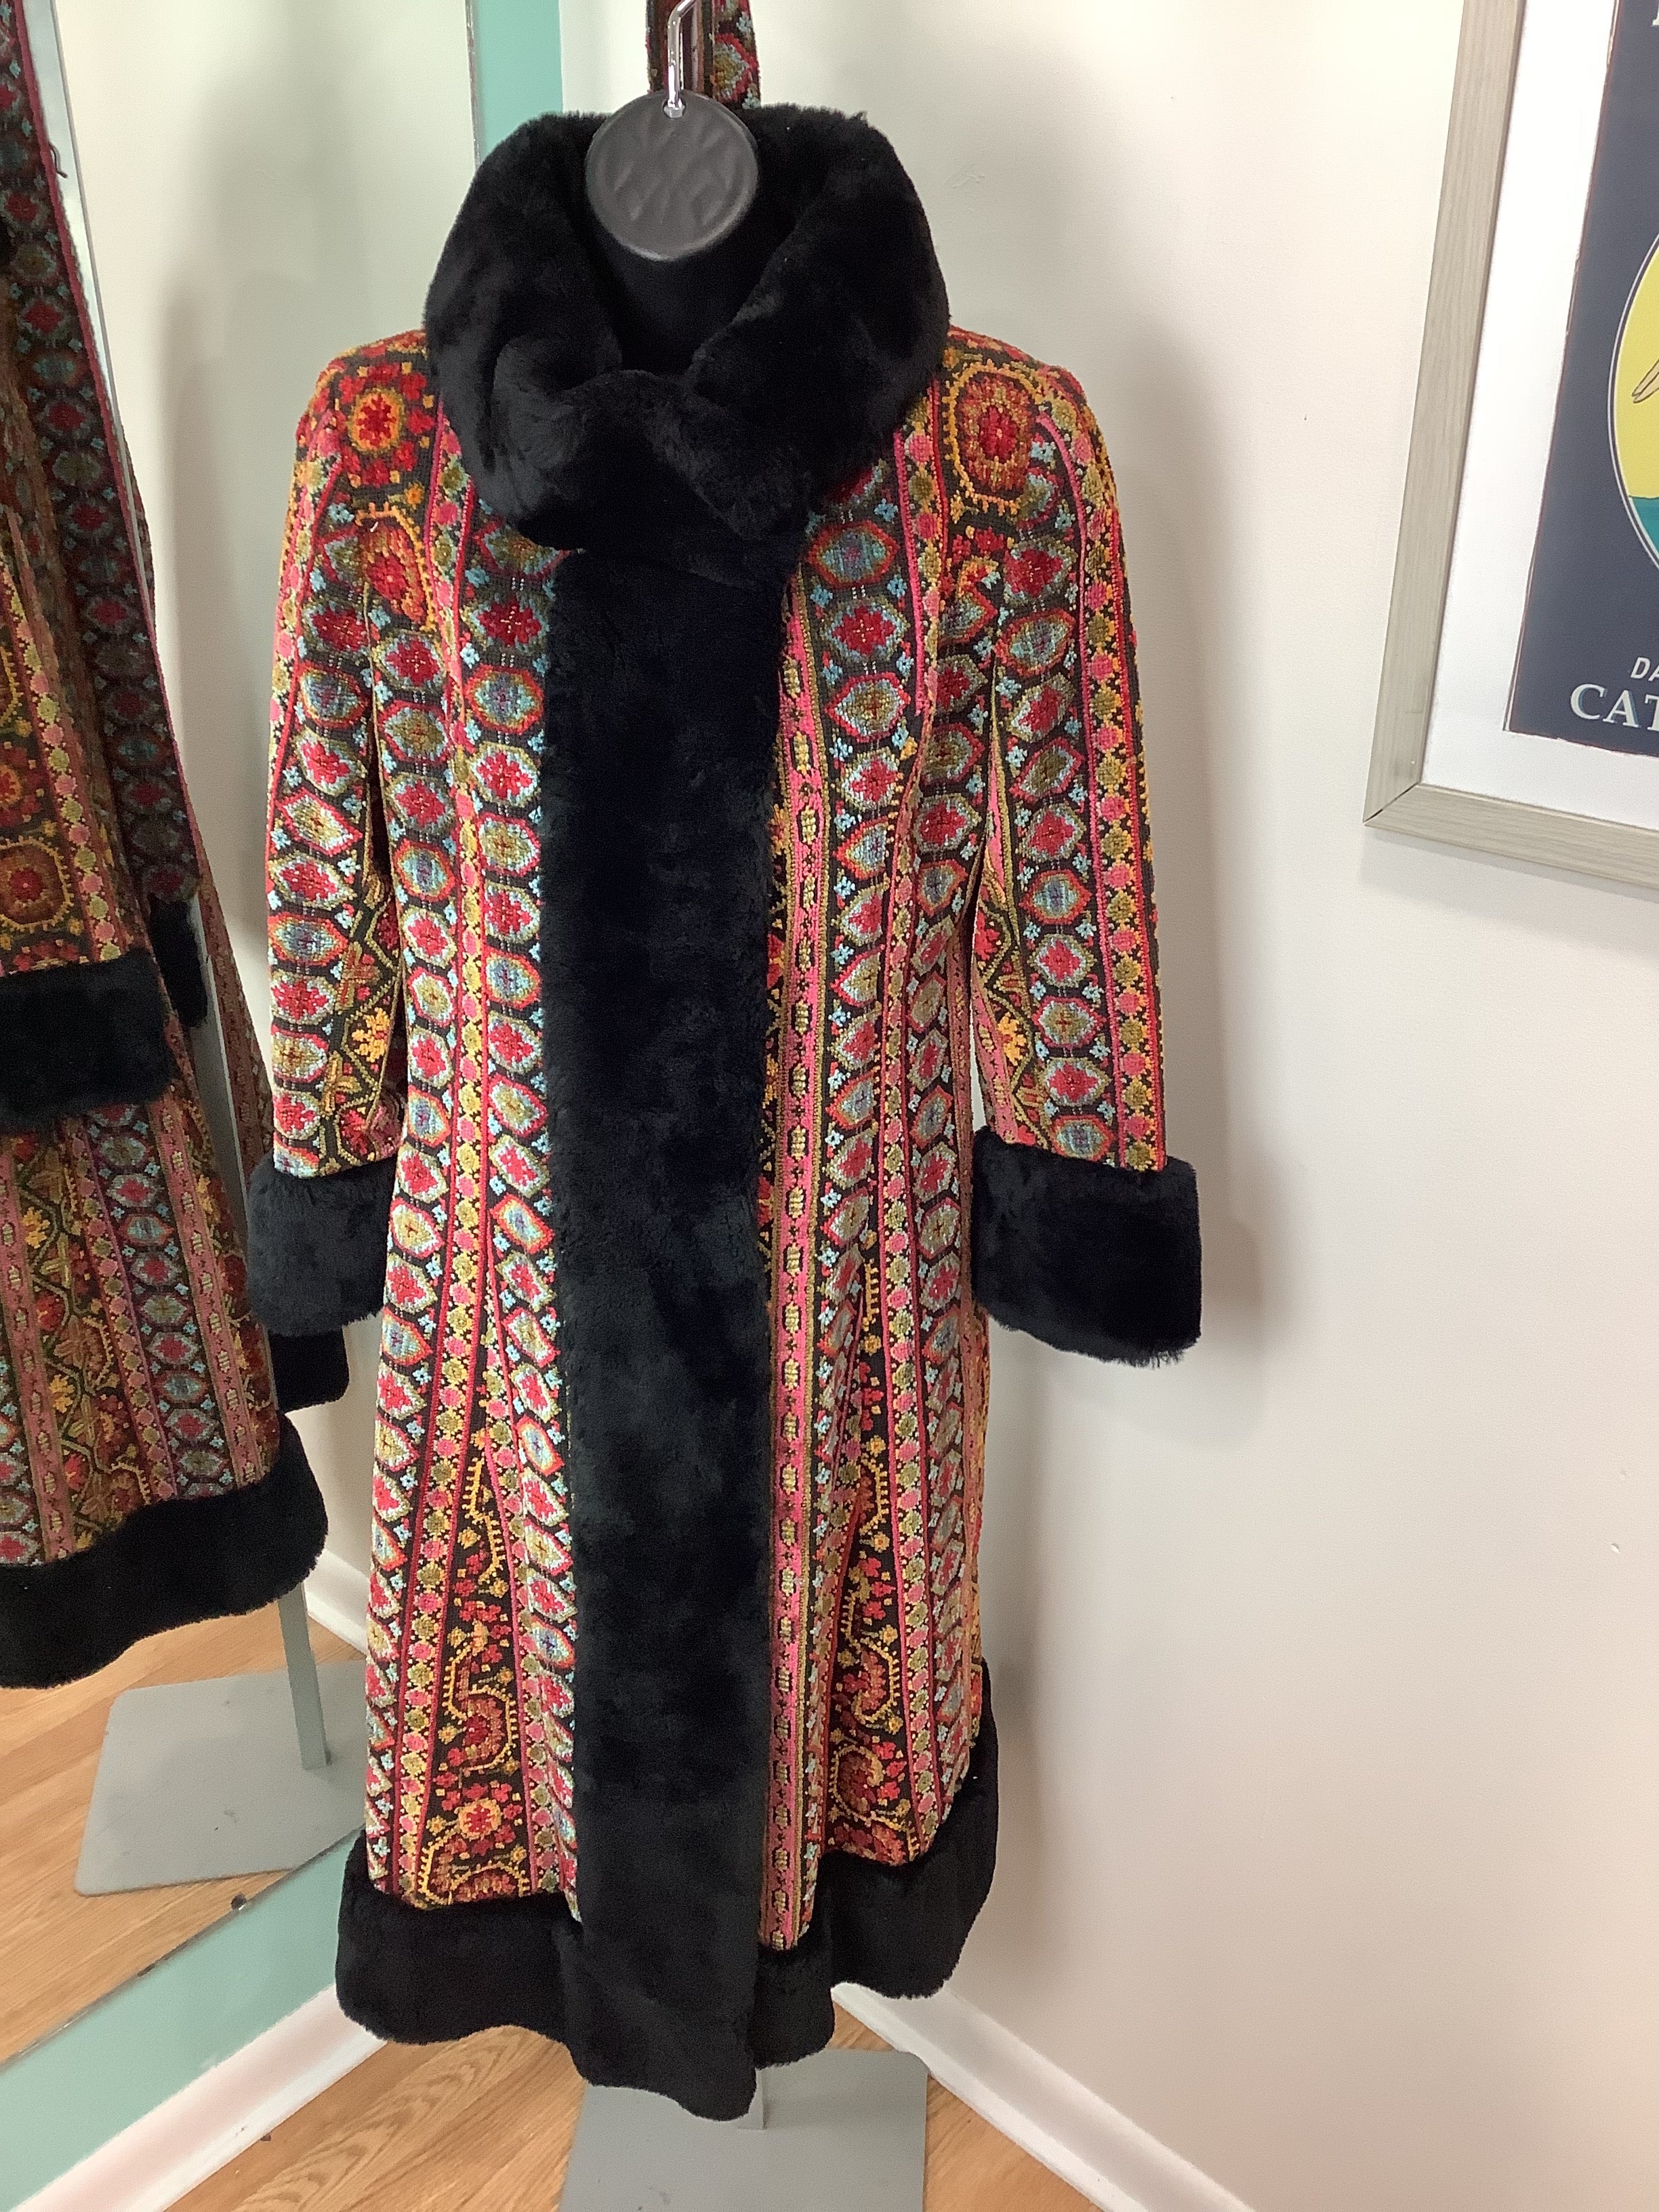 Vintage tapestry coat from Goodwill! : r/ThriftStoreHauls